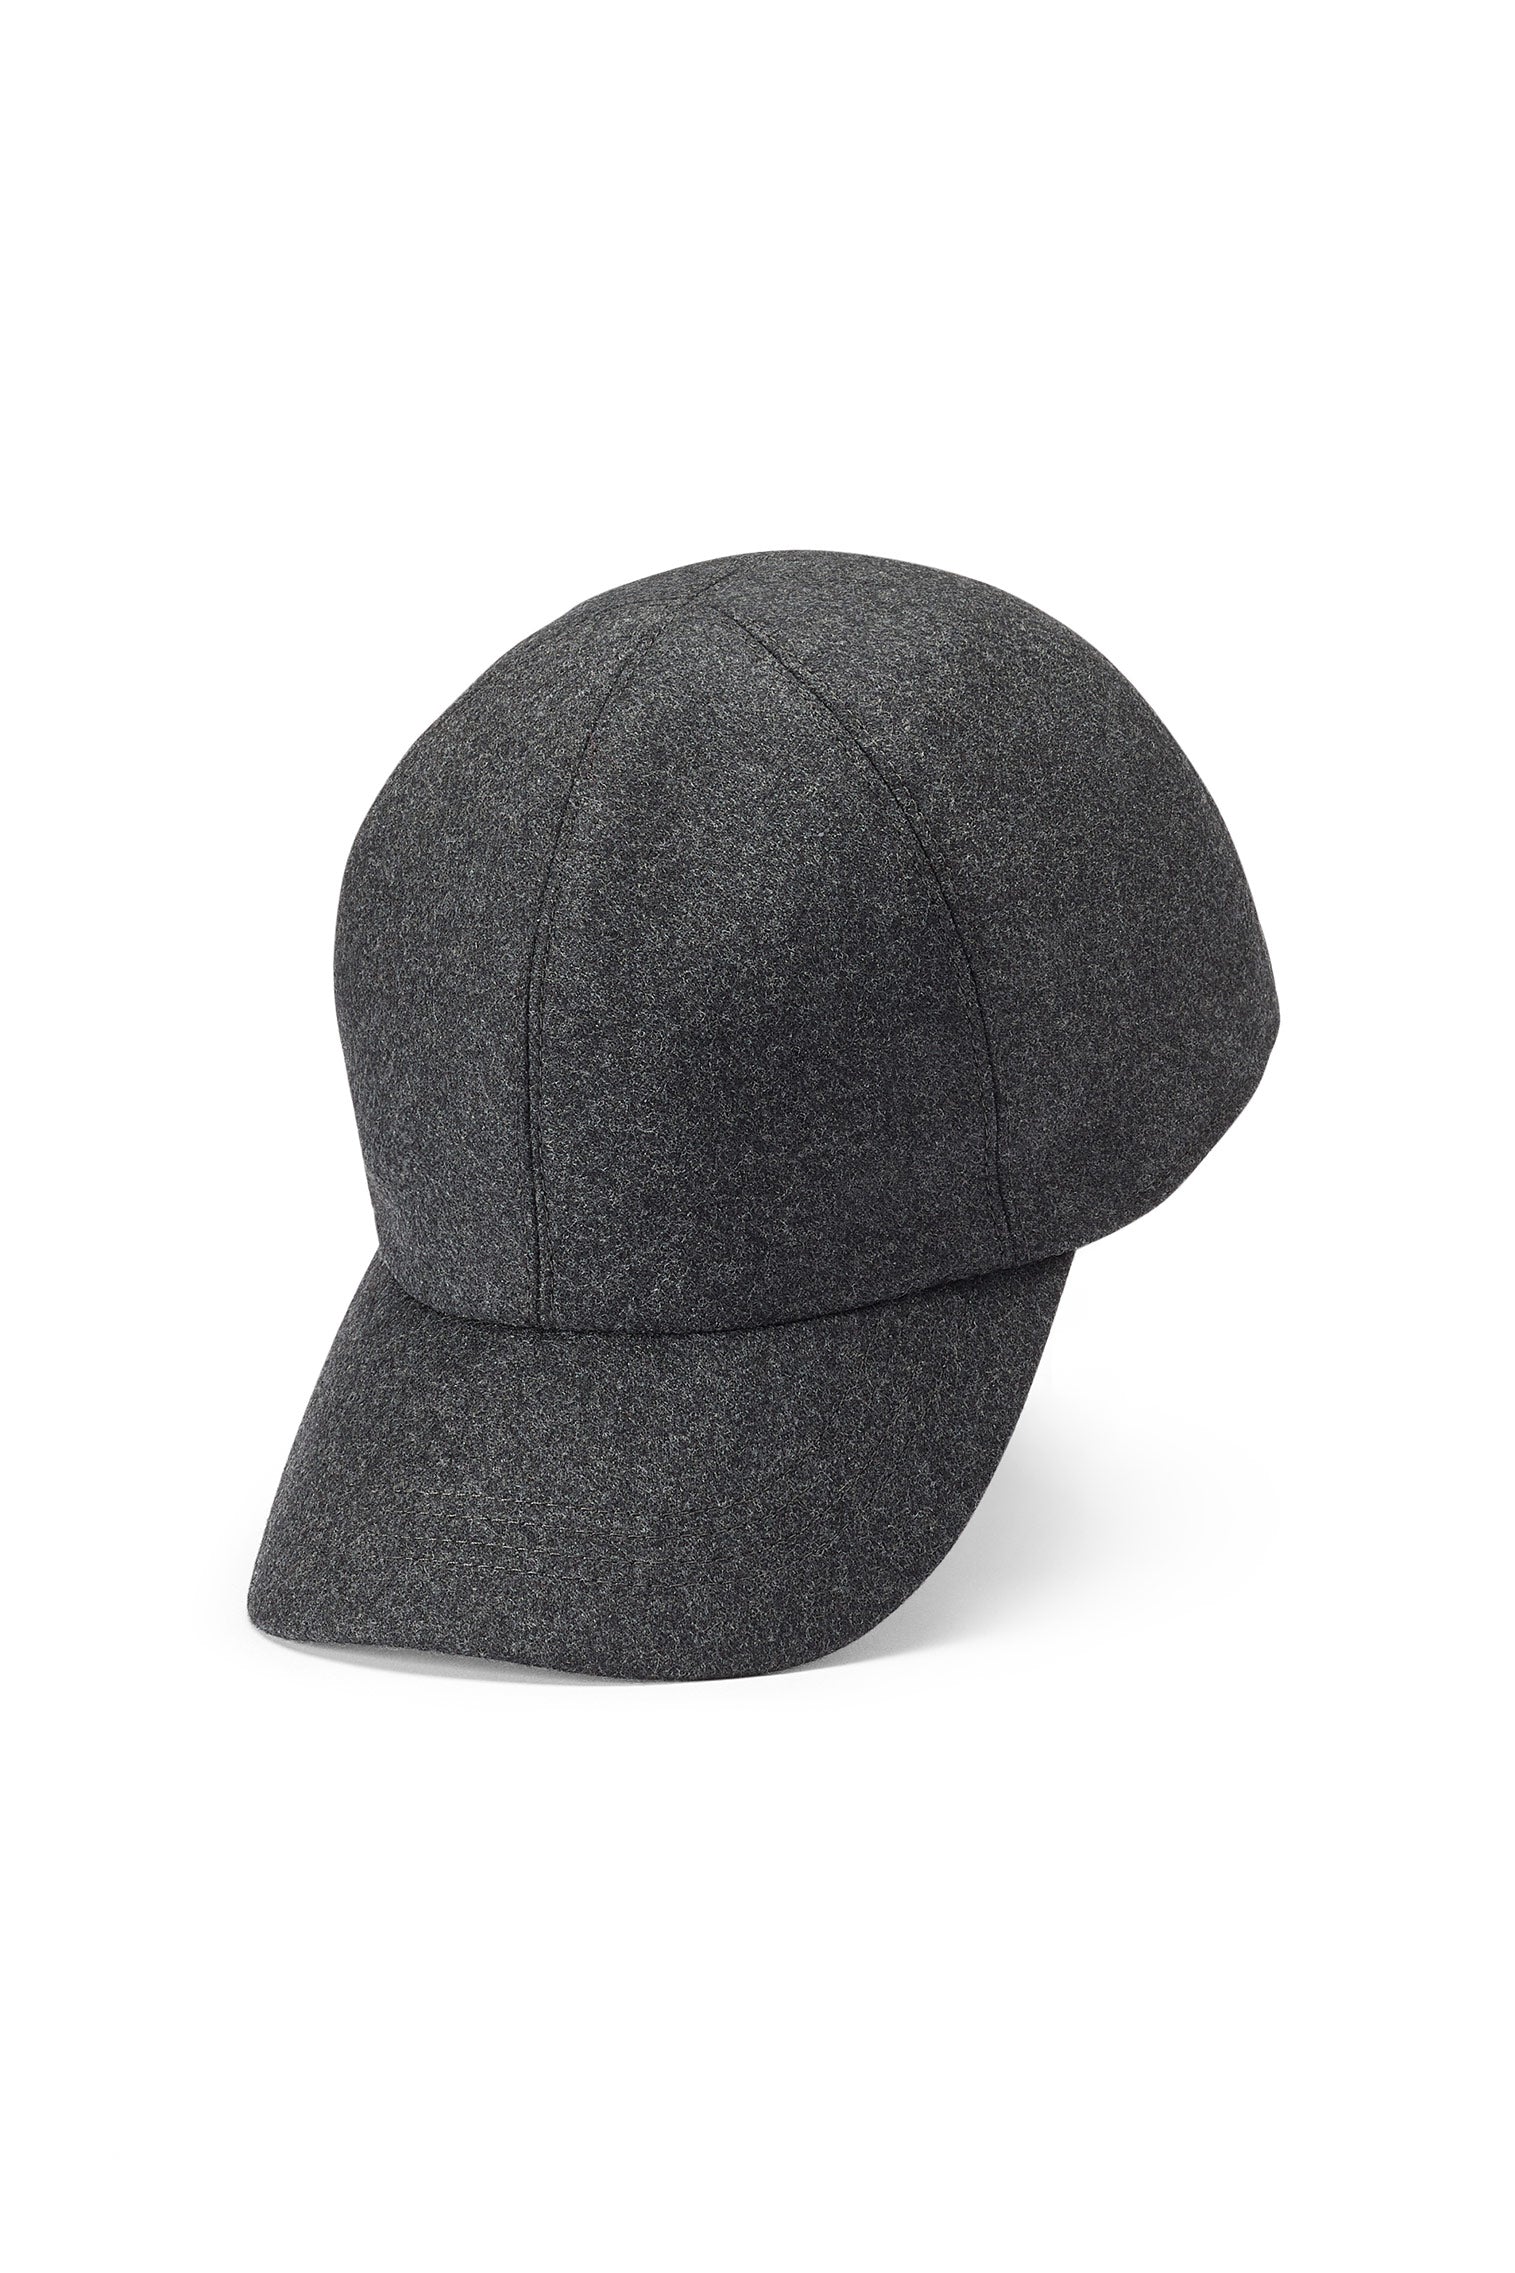 Visby Wool Baseball Cap - Hats for Heart-shaped Face Shapes - Lock & Co. Hatters London UK